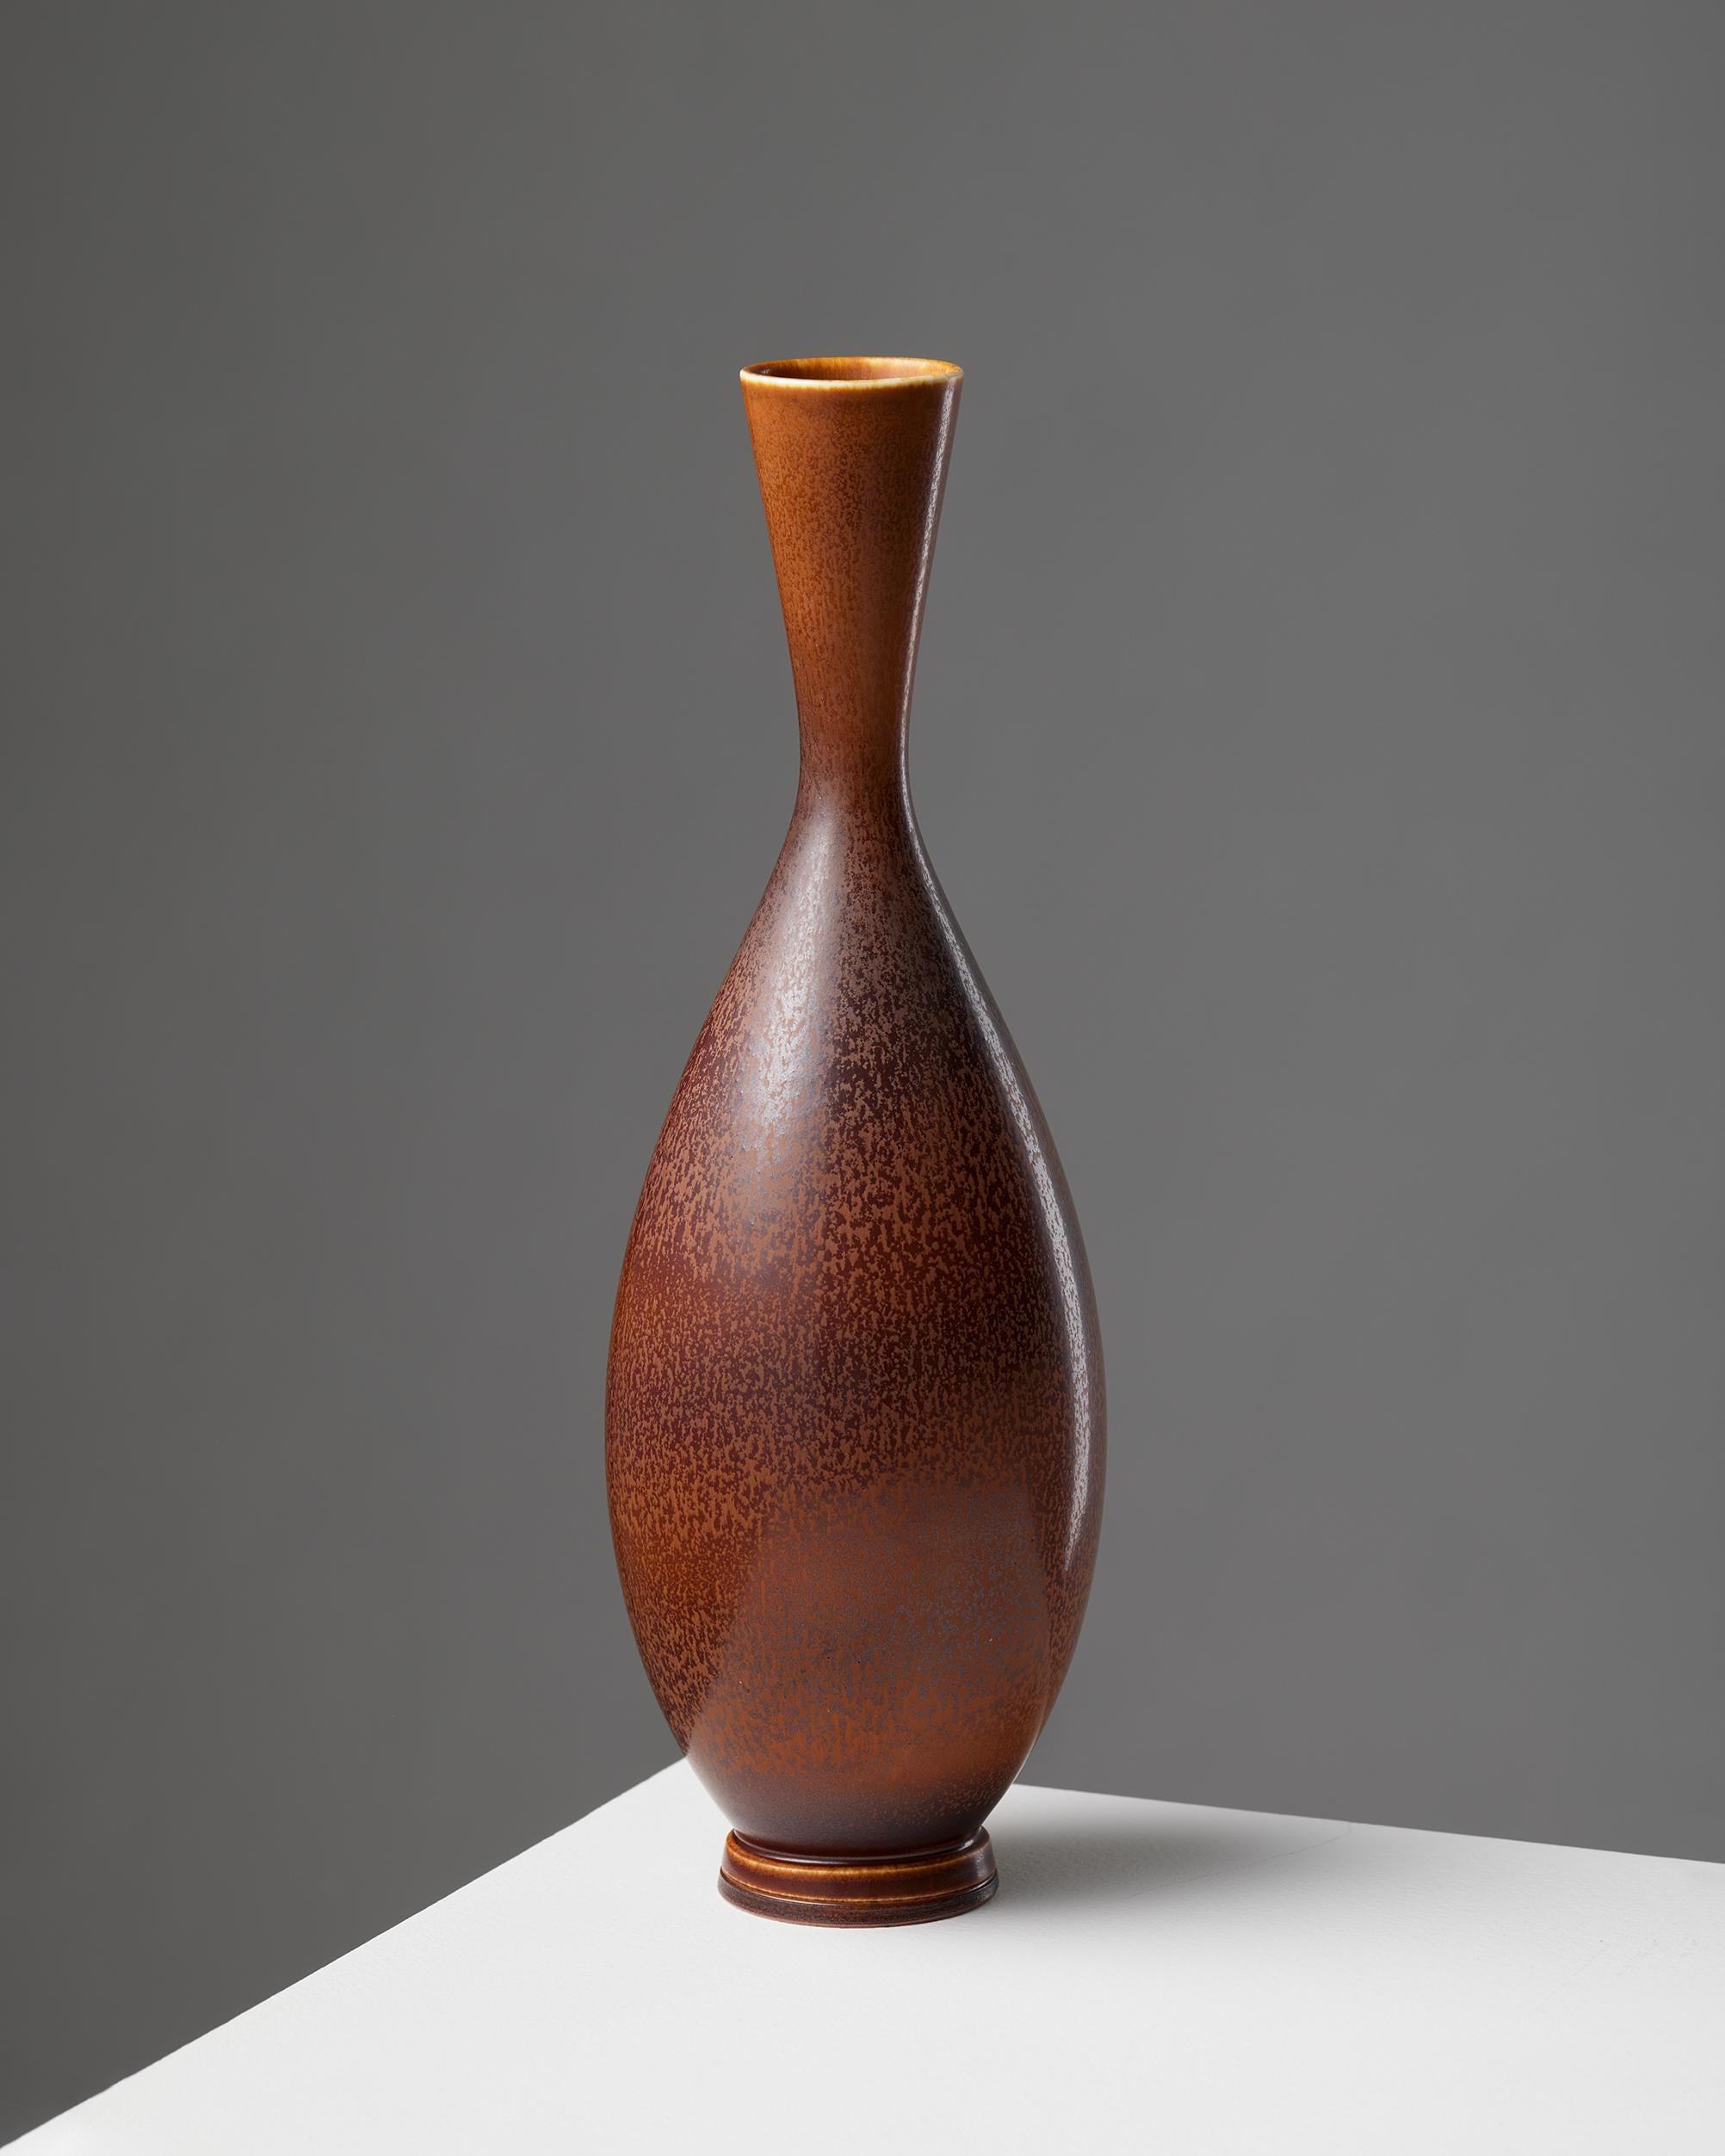 Vase by Berndt Friberg for Gustavsberg, Sweden, 1965

Signed.

H: 25 cm
Diameter: 7.5 cm

Berndt Friberg was born in the southern Sweden town of Hoganas. He came from a long line of ceramists, in an area steeped in the tradition of finely crafted